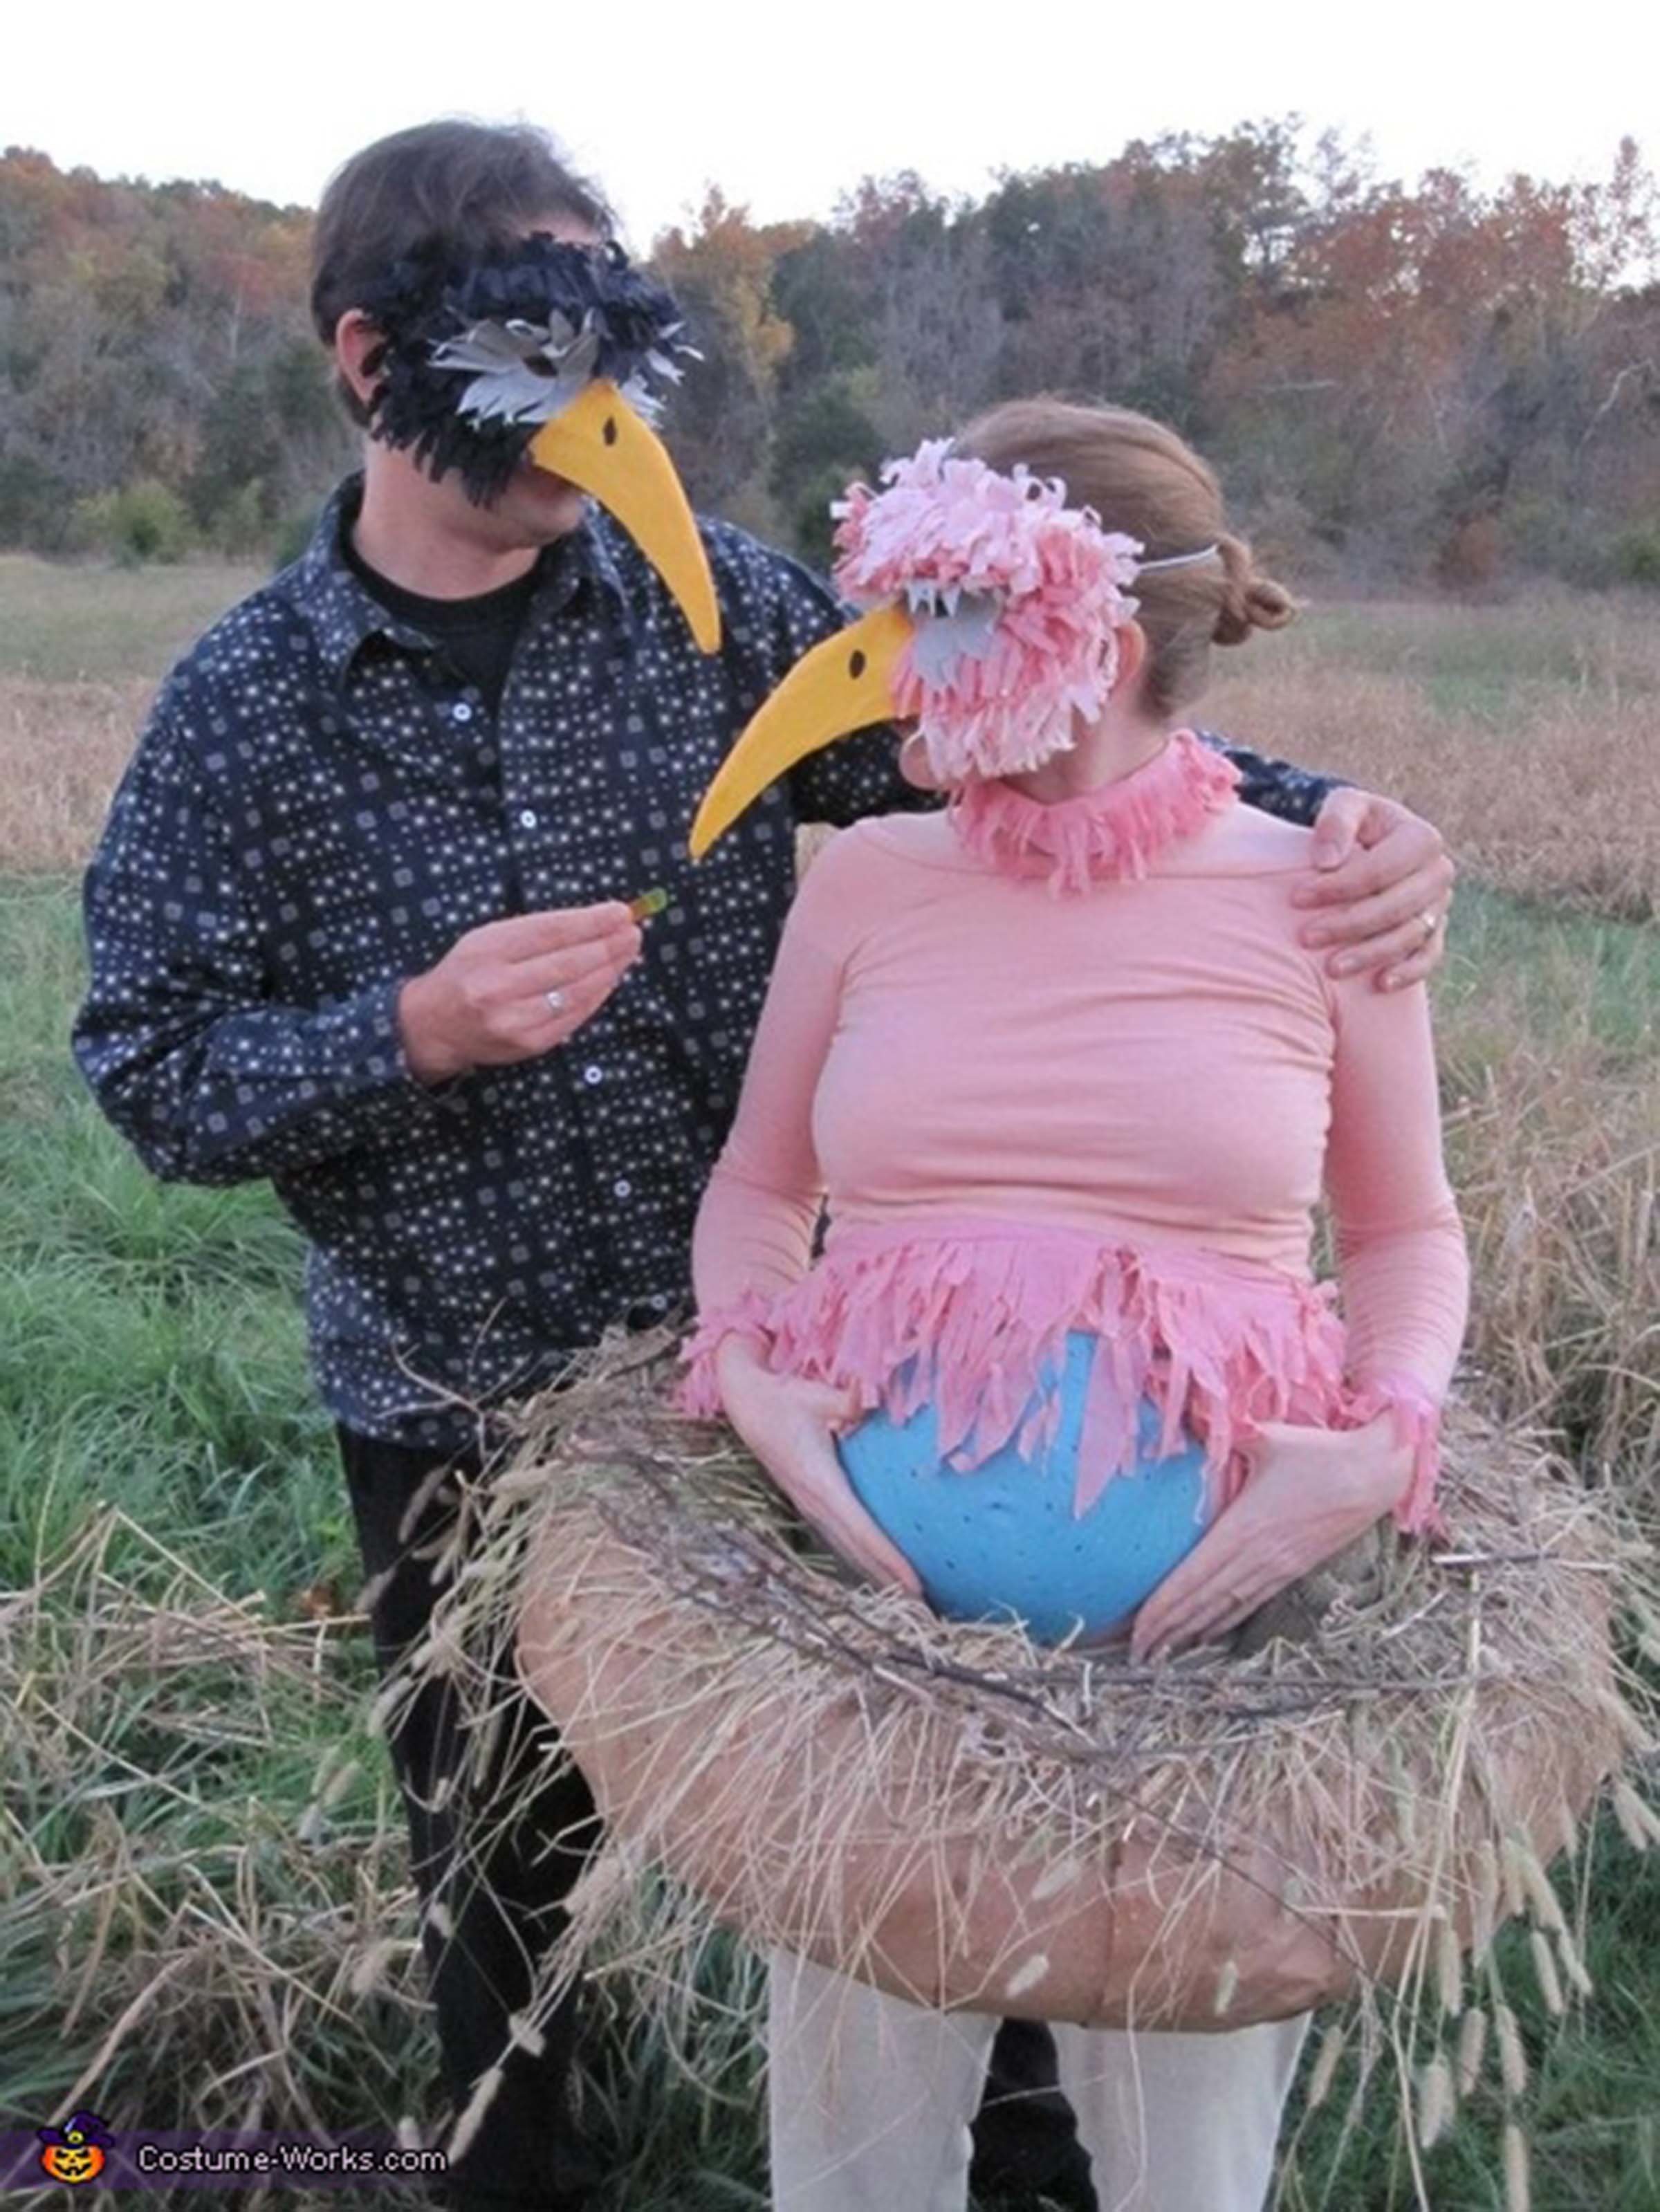 Halloween Costumes For Pregnant Women That Are Fun, Easy And Downright Creative